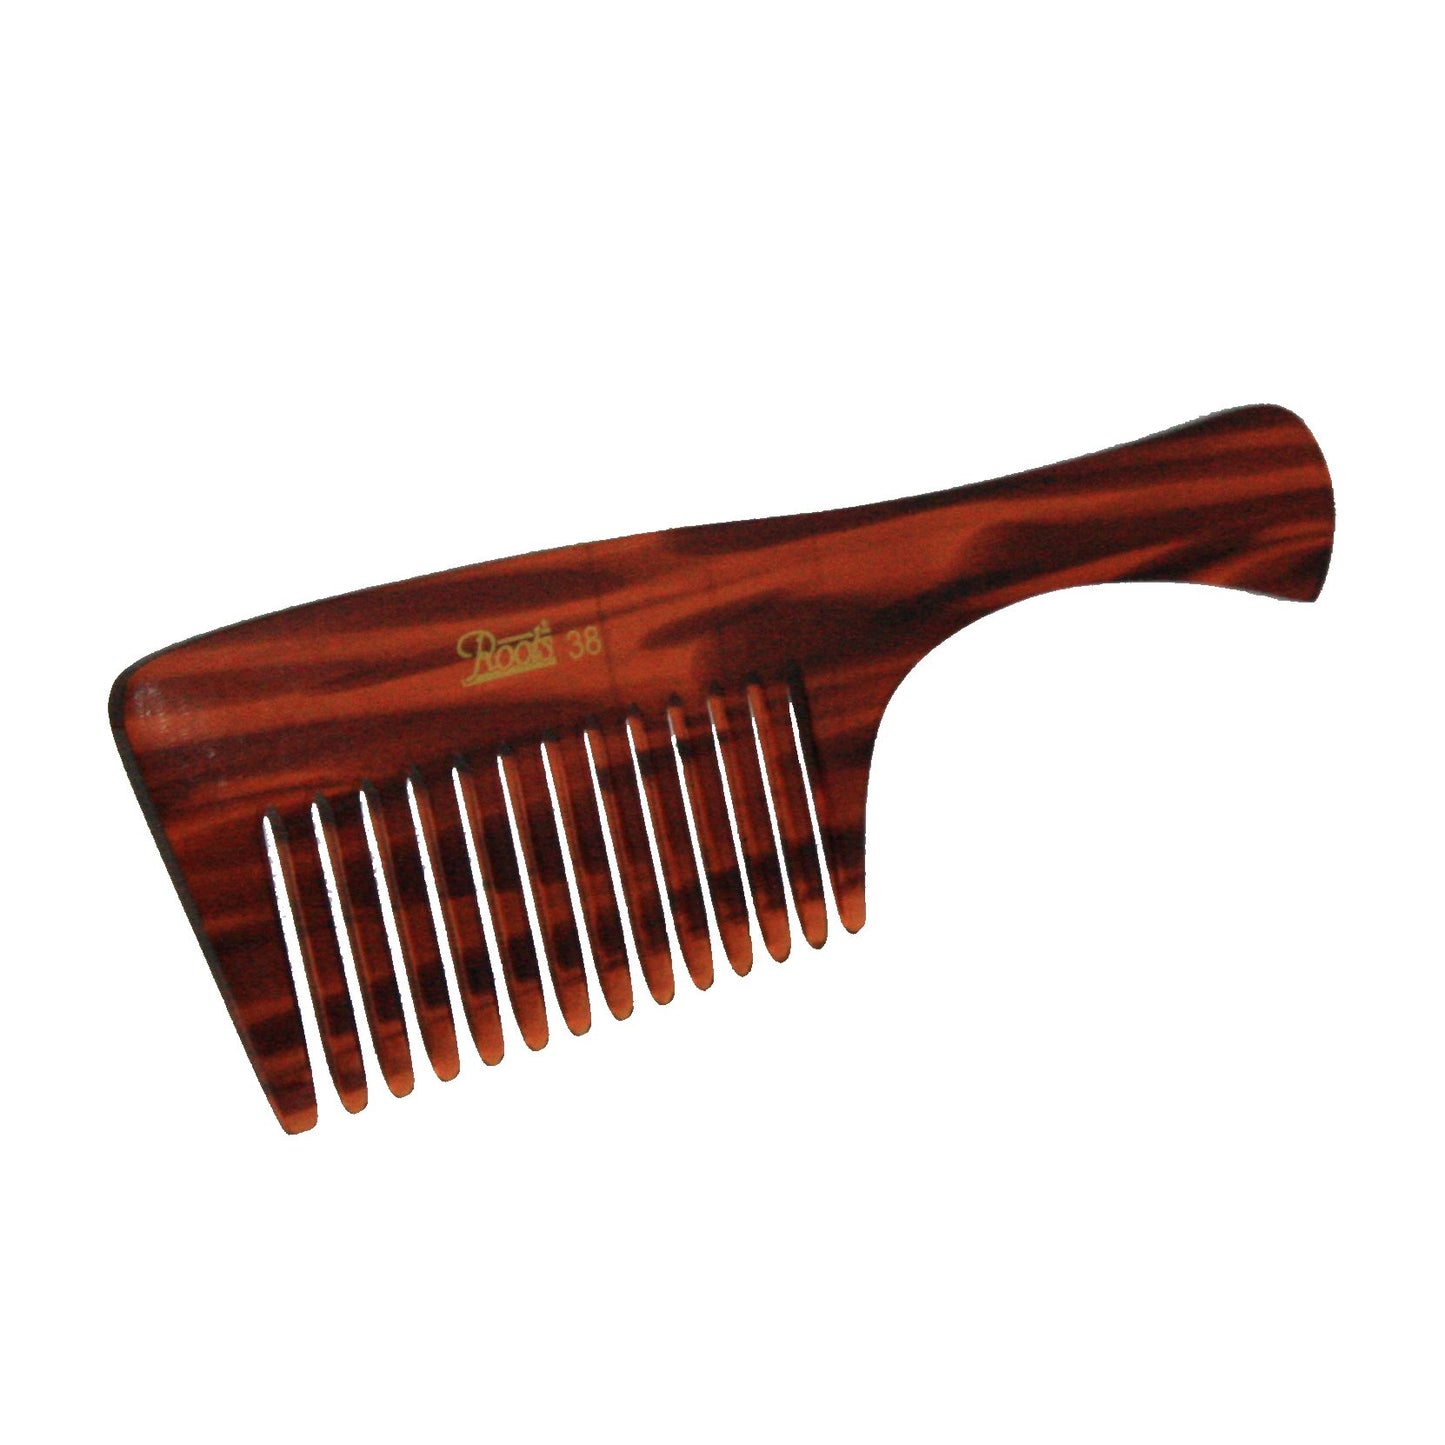 8.5in Roots Cellulose Acetate Rake Handle Comb - Clearance